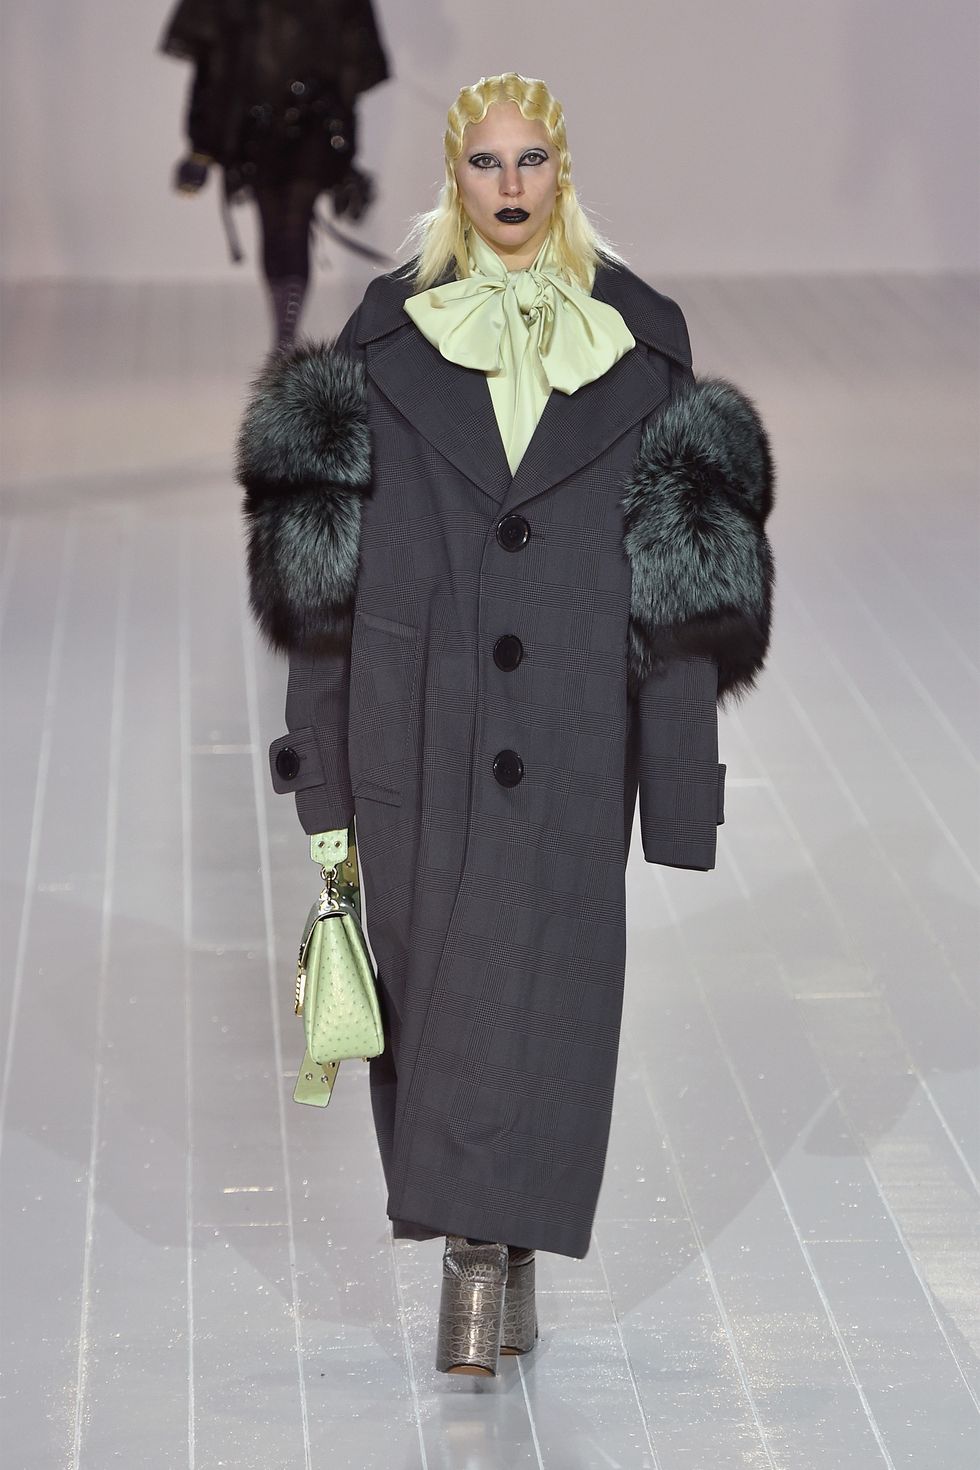 <p>Hidden amongst the lineup of Marc Jacobs' Fall 2016 show was none other than Lady Gaga—who walked the runway in an oversized coat and towering platform heels. Like all the other models in the show, the singer had her hair bleached for the occasion. Gaga's appearance marked NYFW's biggest star-studded runway cameo of the season.</p>